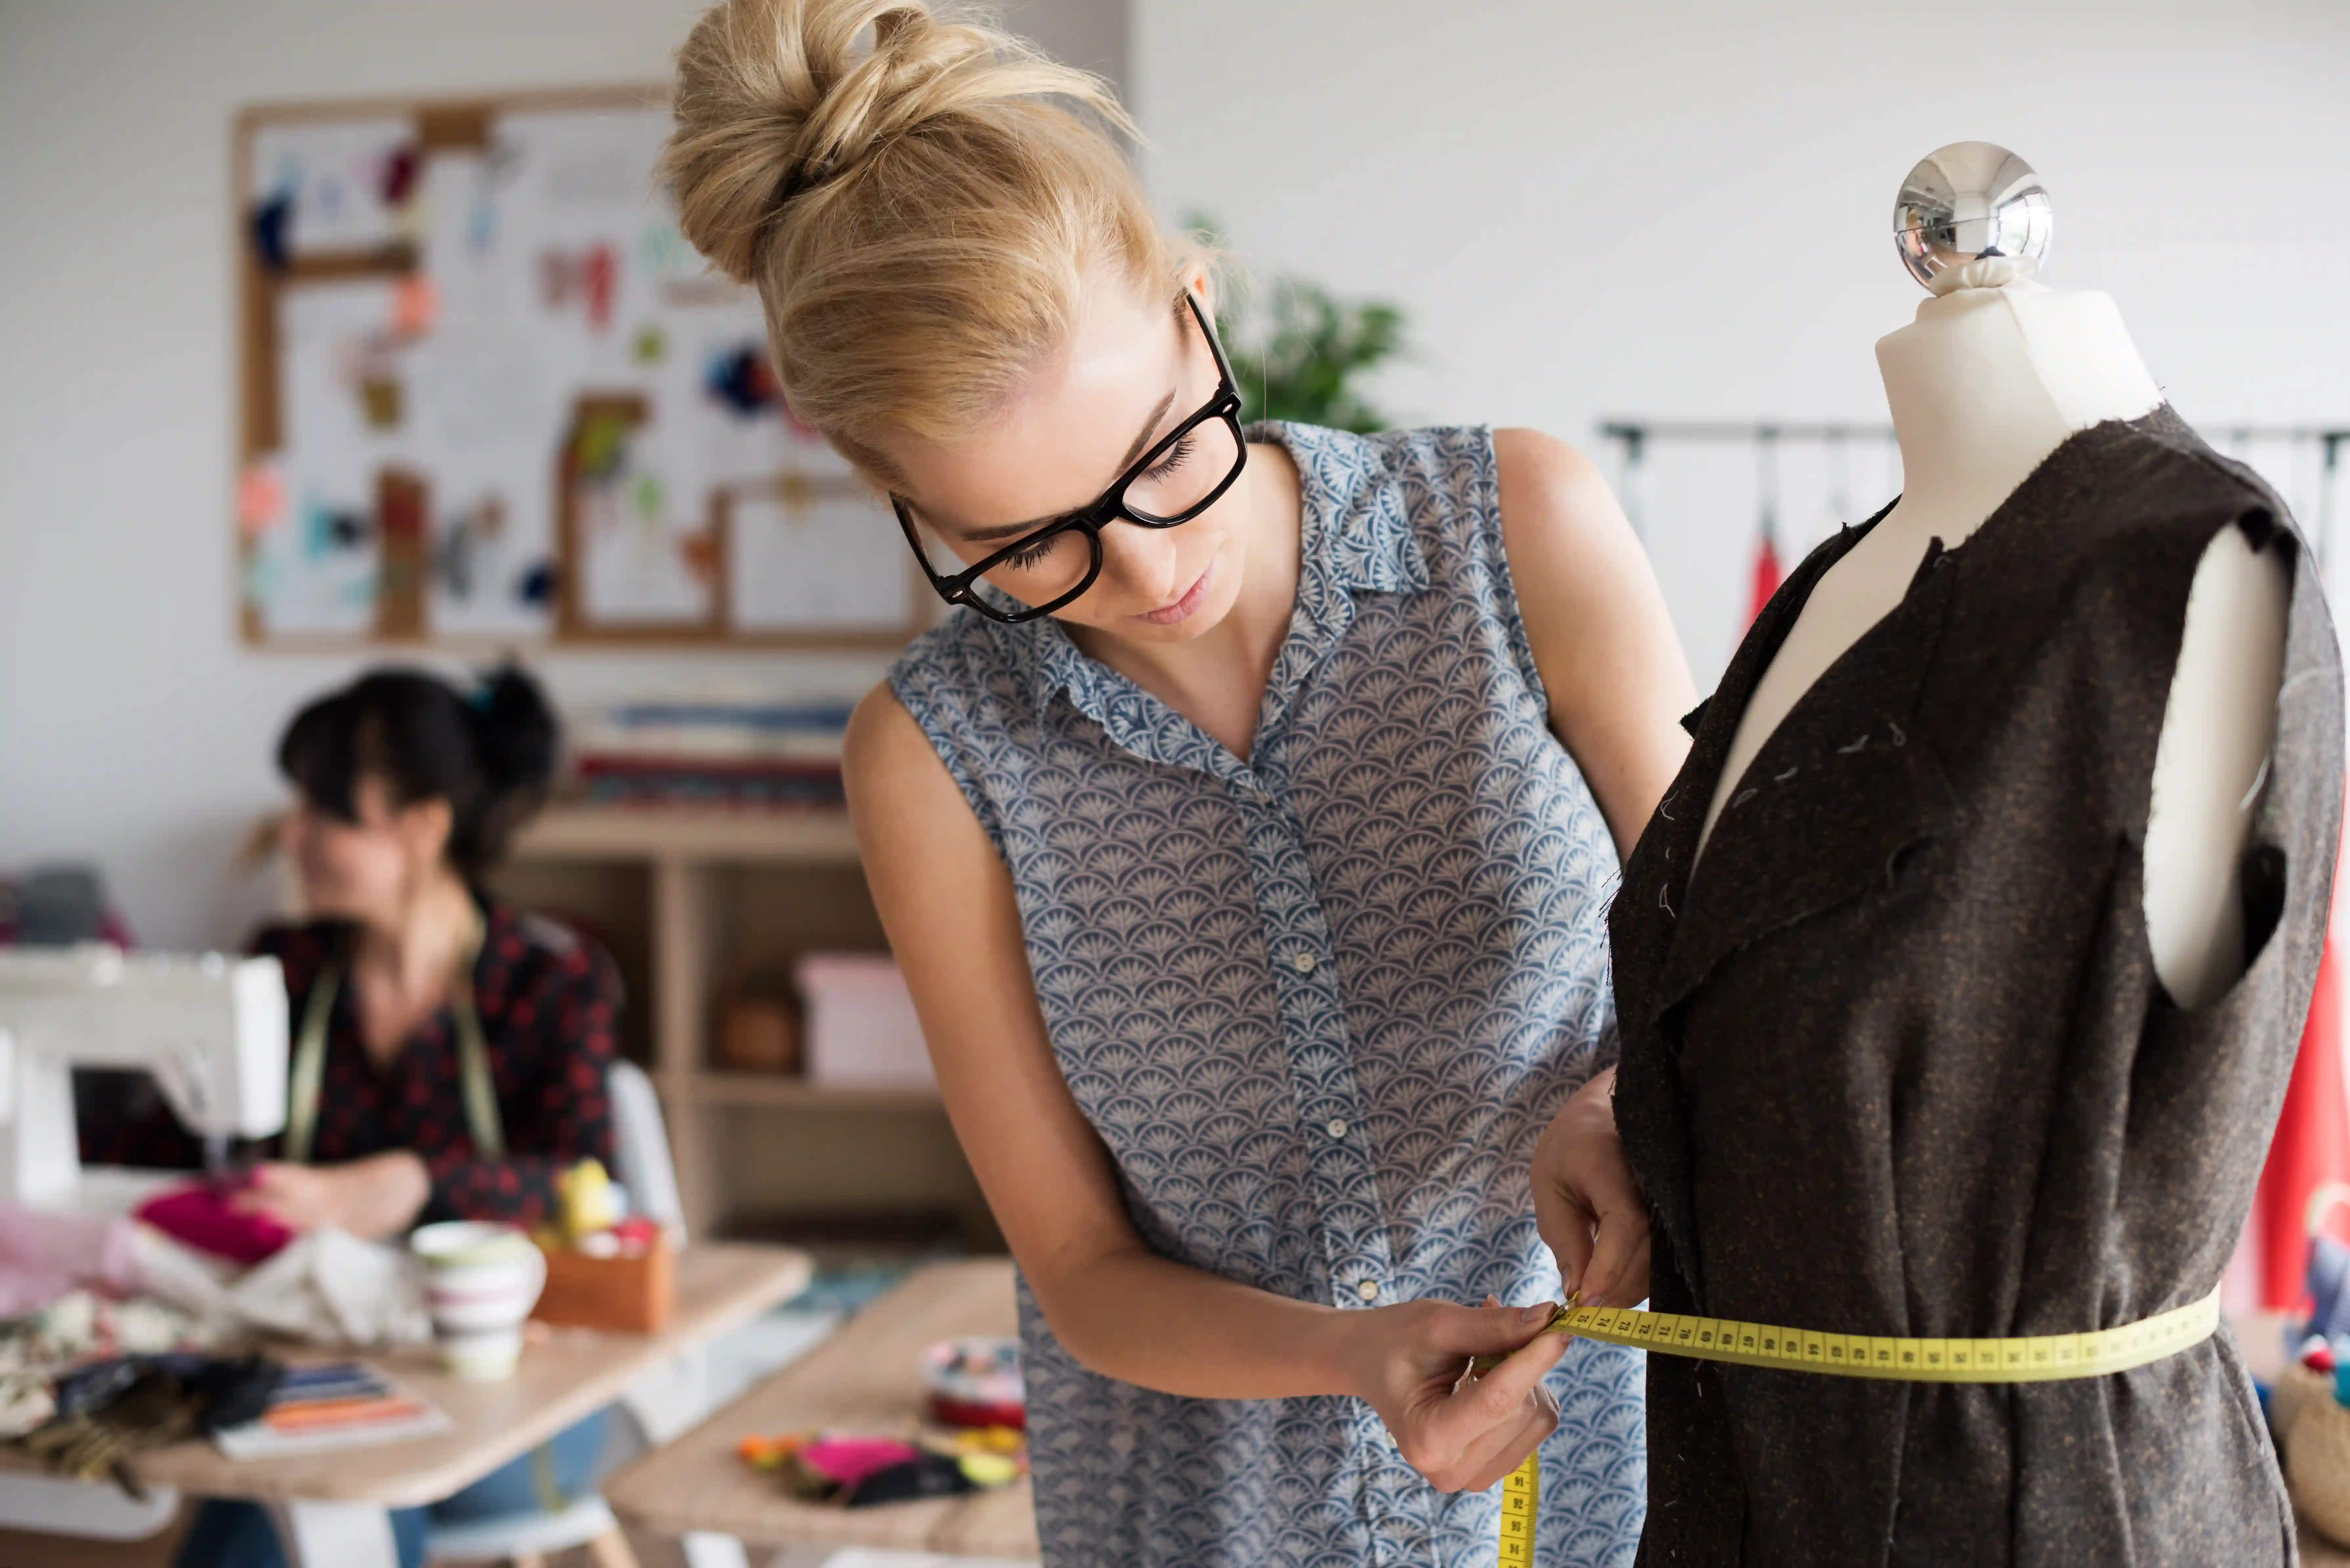 The impact of Fashion design courses on your career